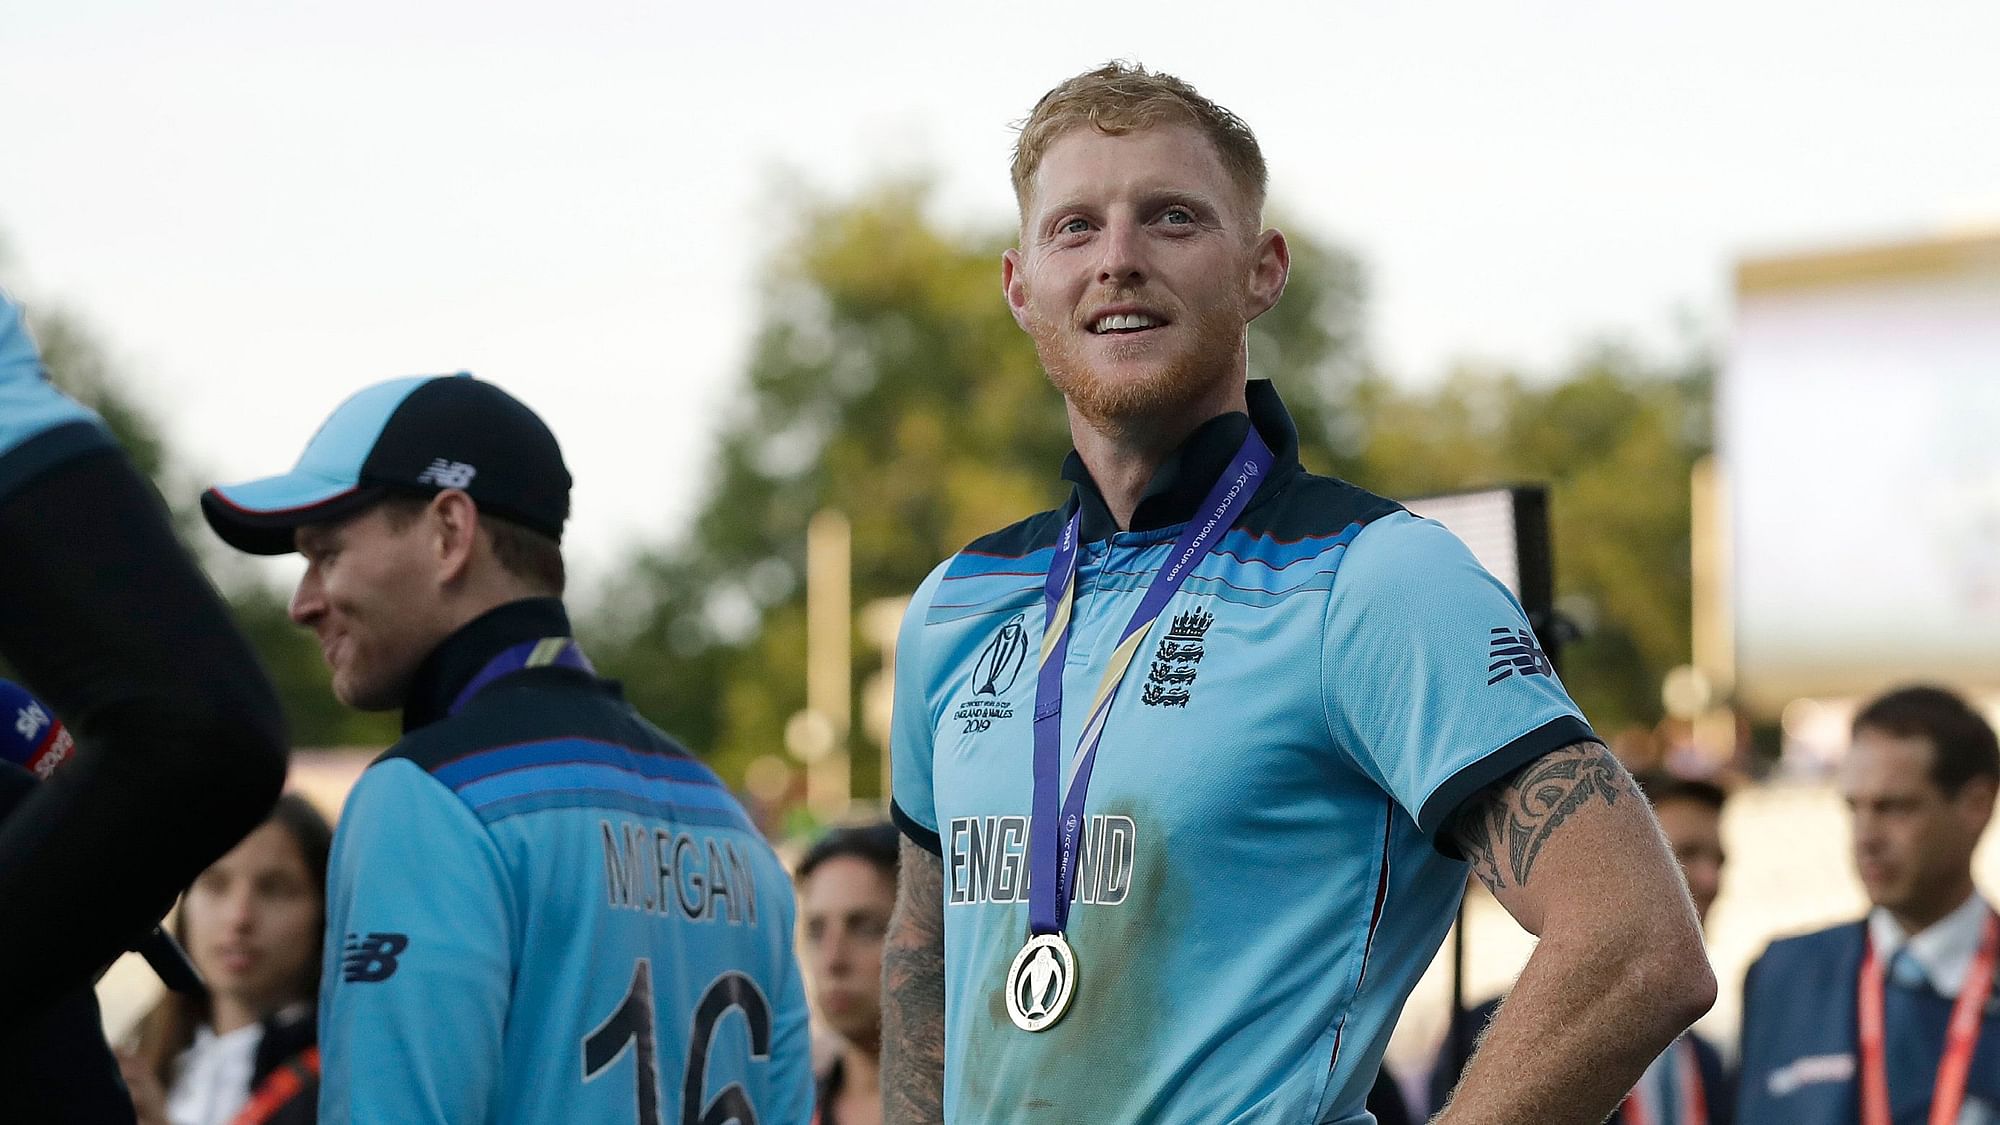 In an Instagram post, Ben Stokes has said he believes Kane Williamson is better deserving of the ‘New Zealander of the Year’ award.&nbsp;